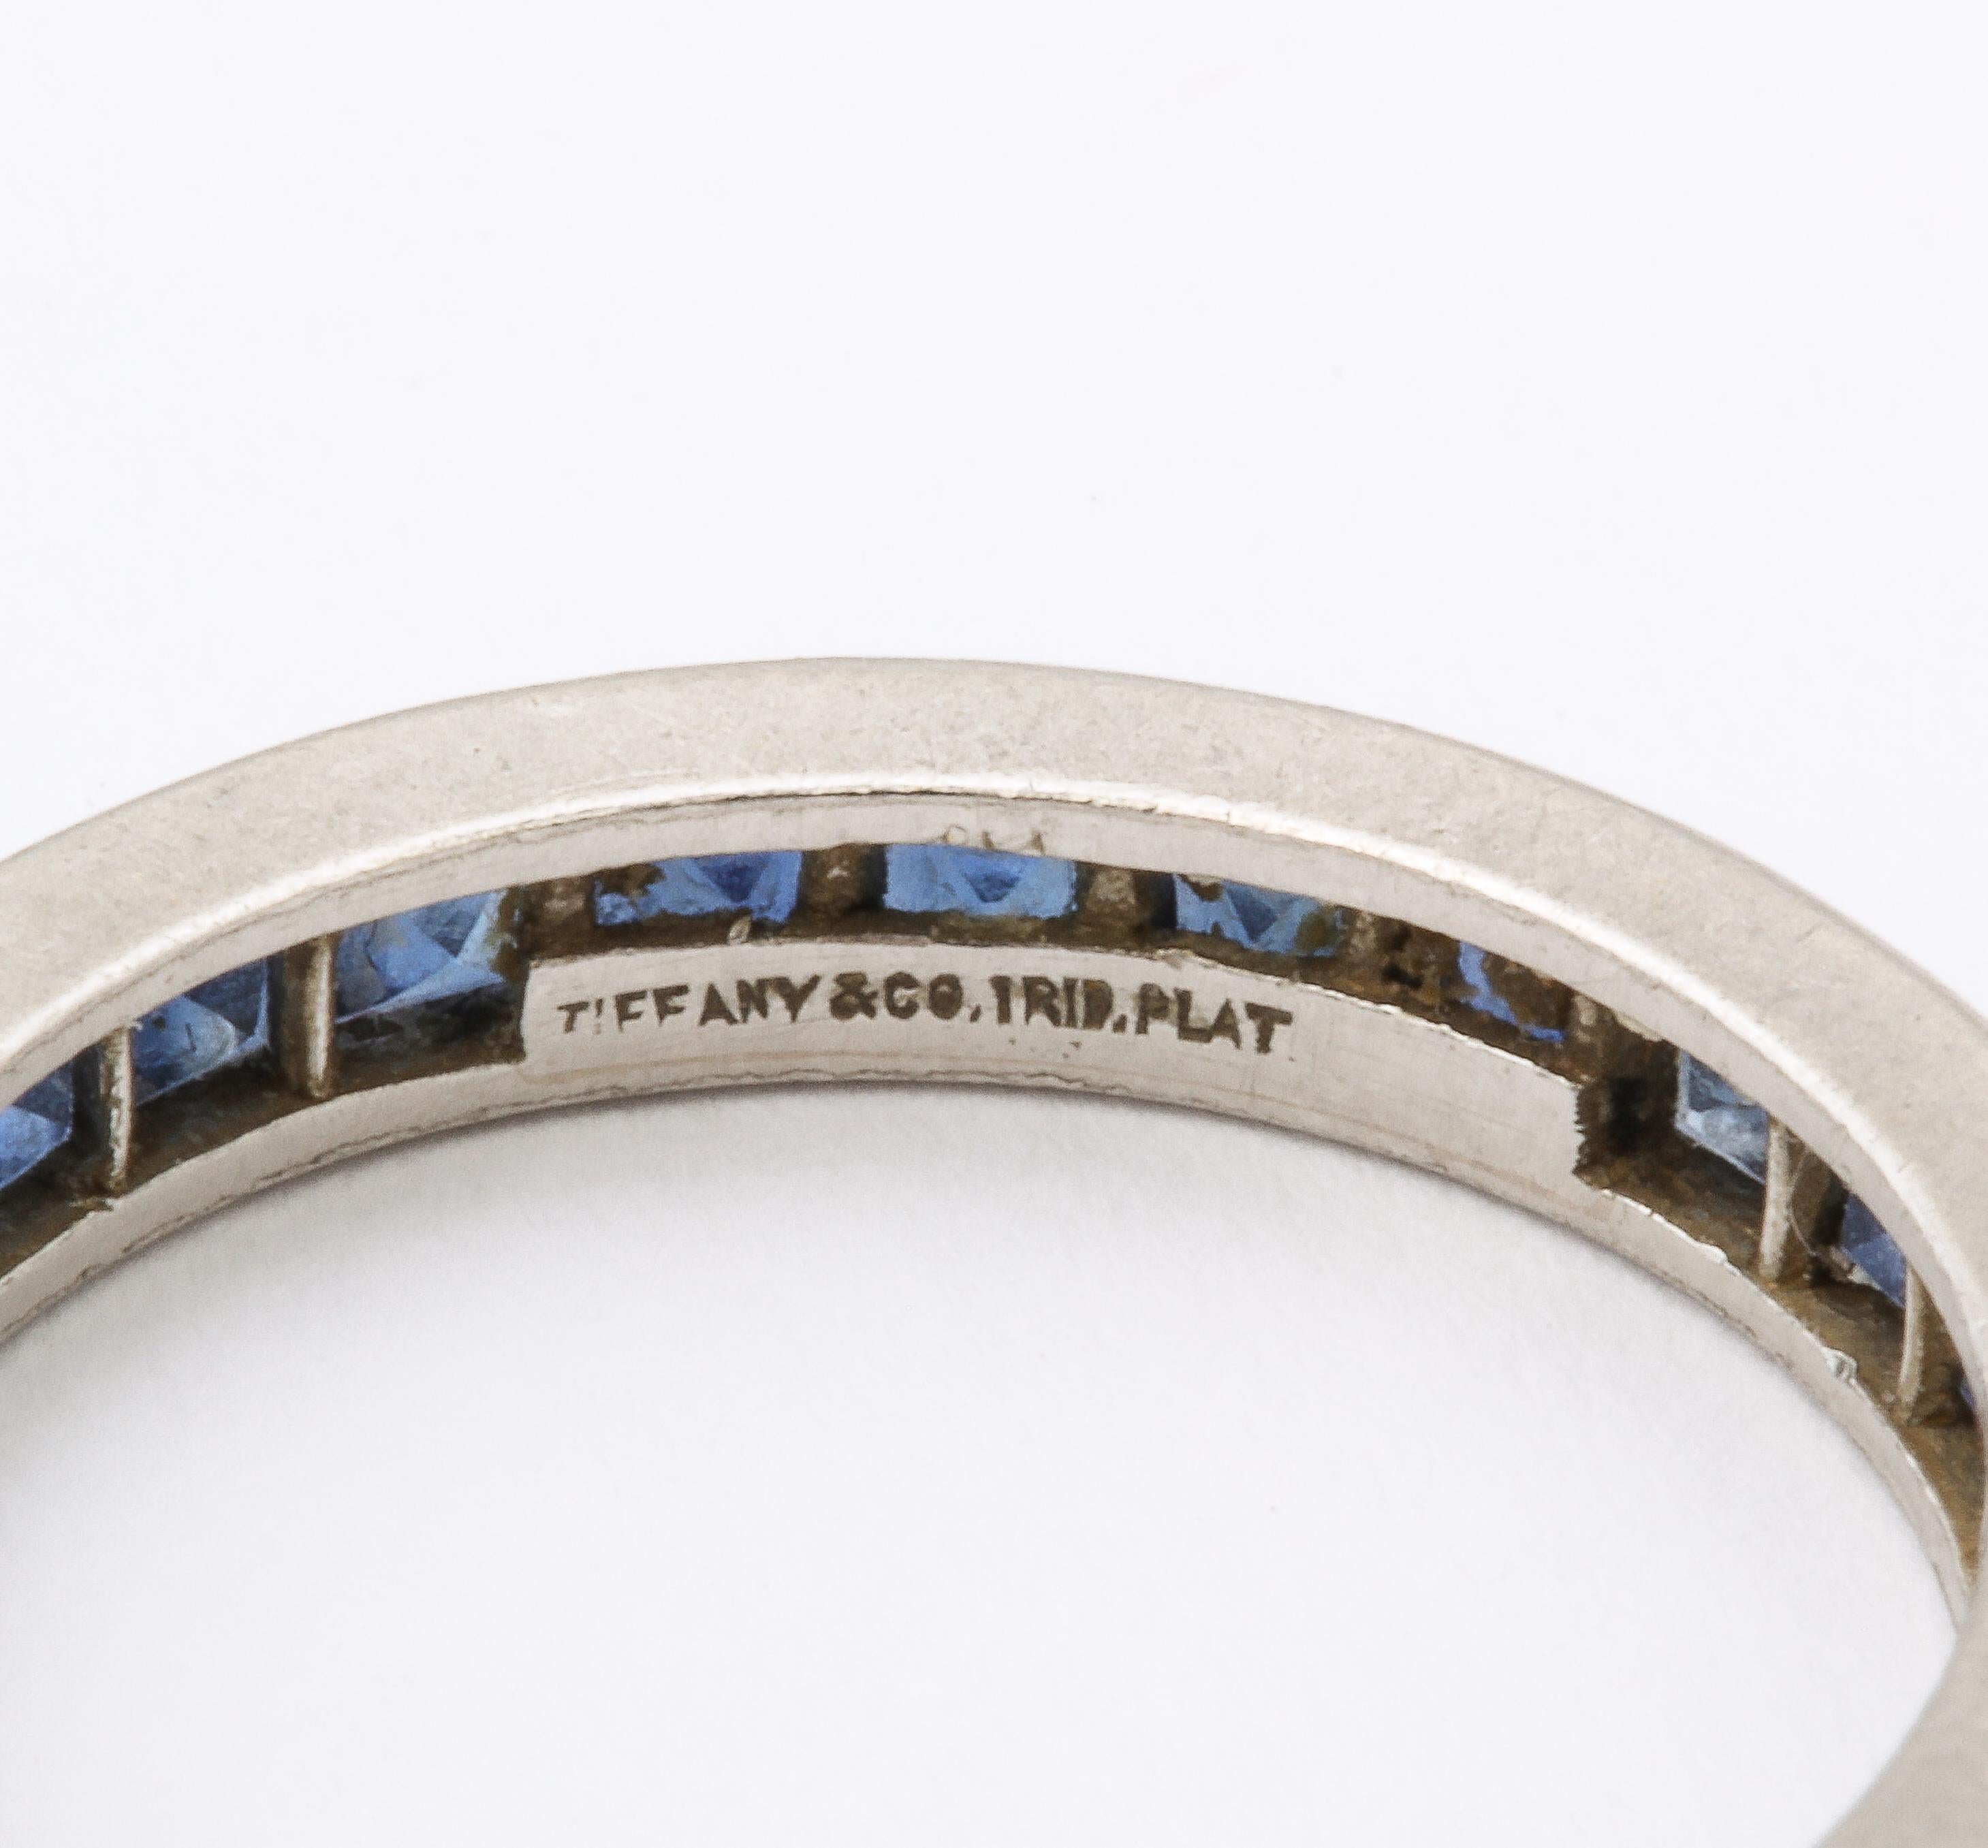 Platinum eternity wedding band ring by Tiffany & Co. Full circle of blue sapphires, marked Tiffany & Co. 

Ring Size 6
3.1mm wide, 20.5mm diameter